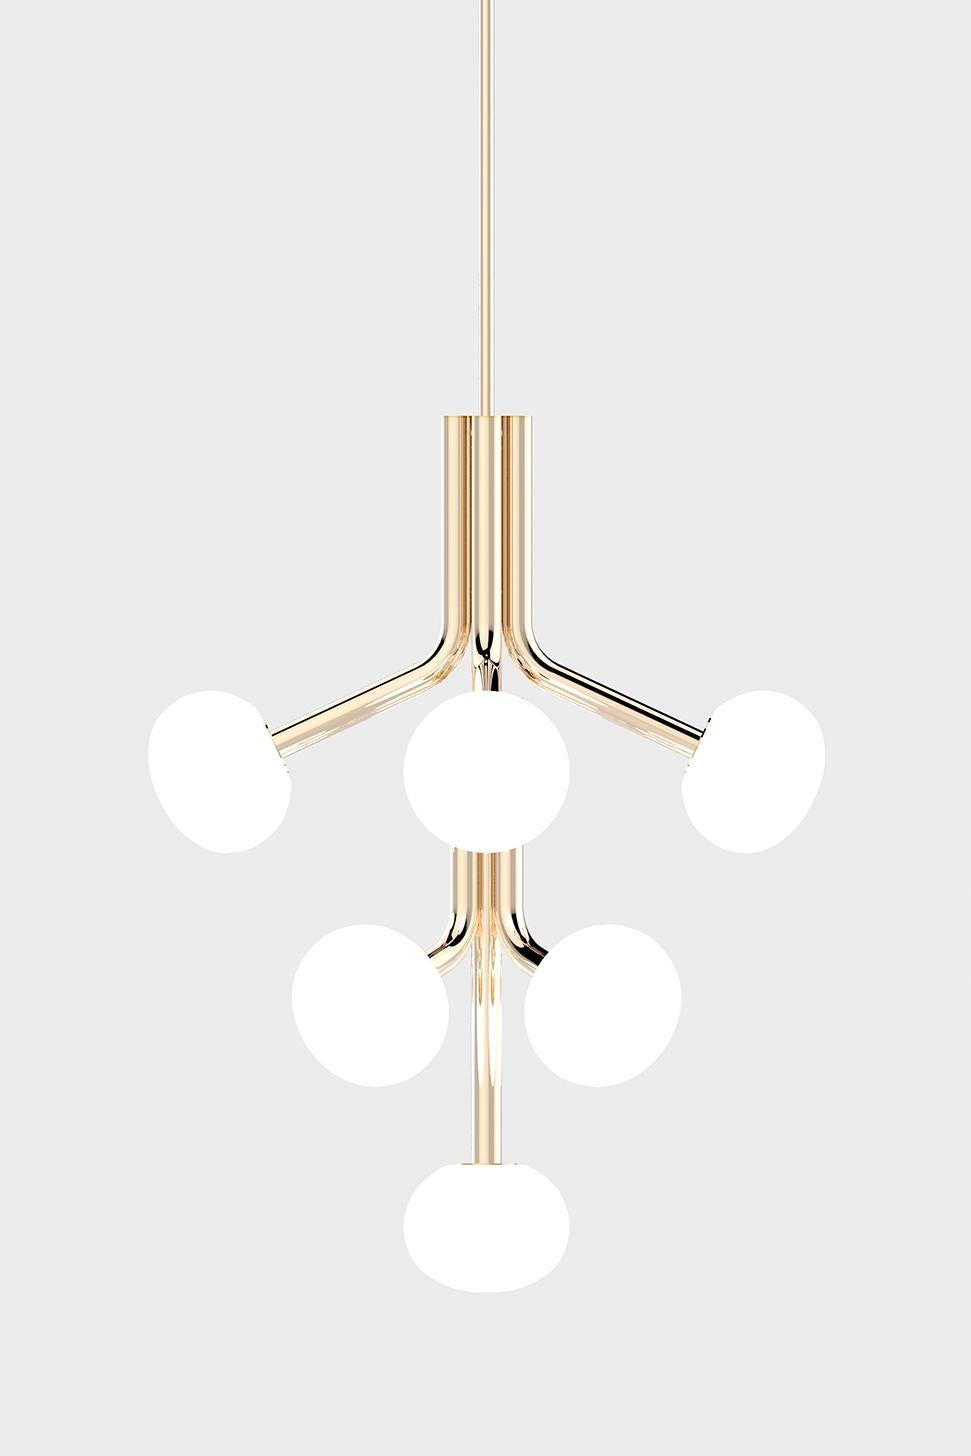 The graceful Etoile collection is composed of curved limbs providing a soft glow from the sand blasted, hand blown glass shades. The drop and stems are finished in either polished brass or nickel, or matte black.